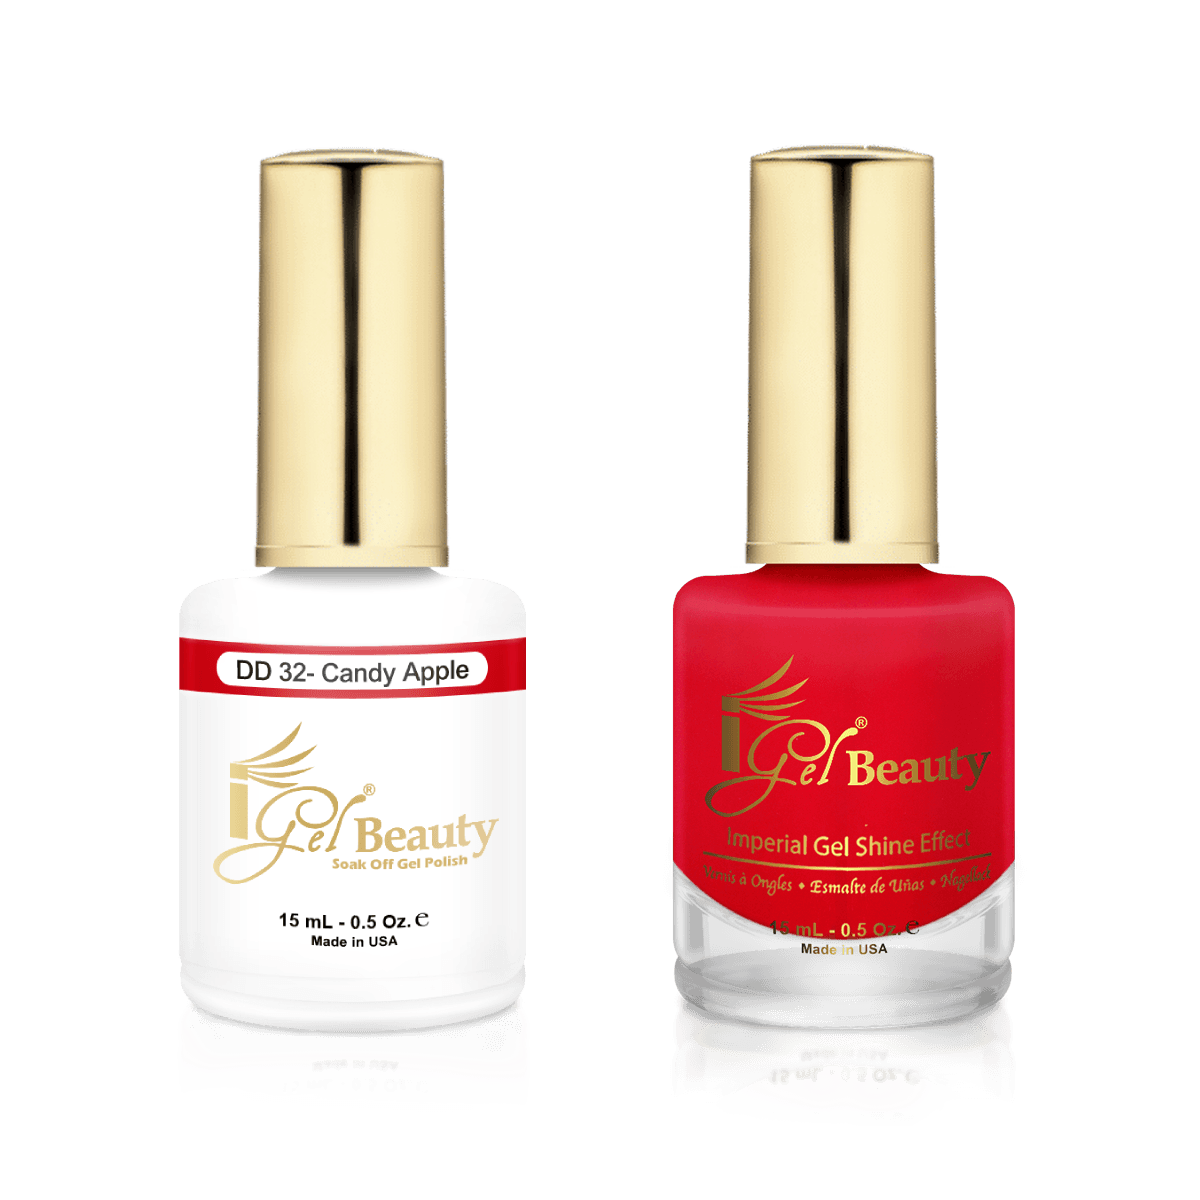 IGel Duo Gel Polish + Matching Nail Lacquer DD 32 CANDY APPLE